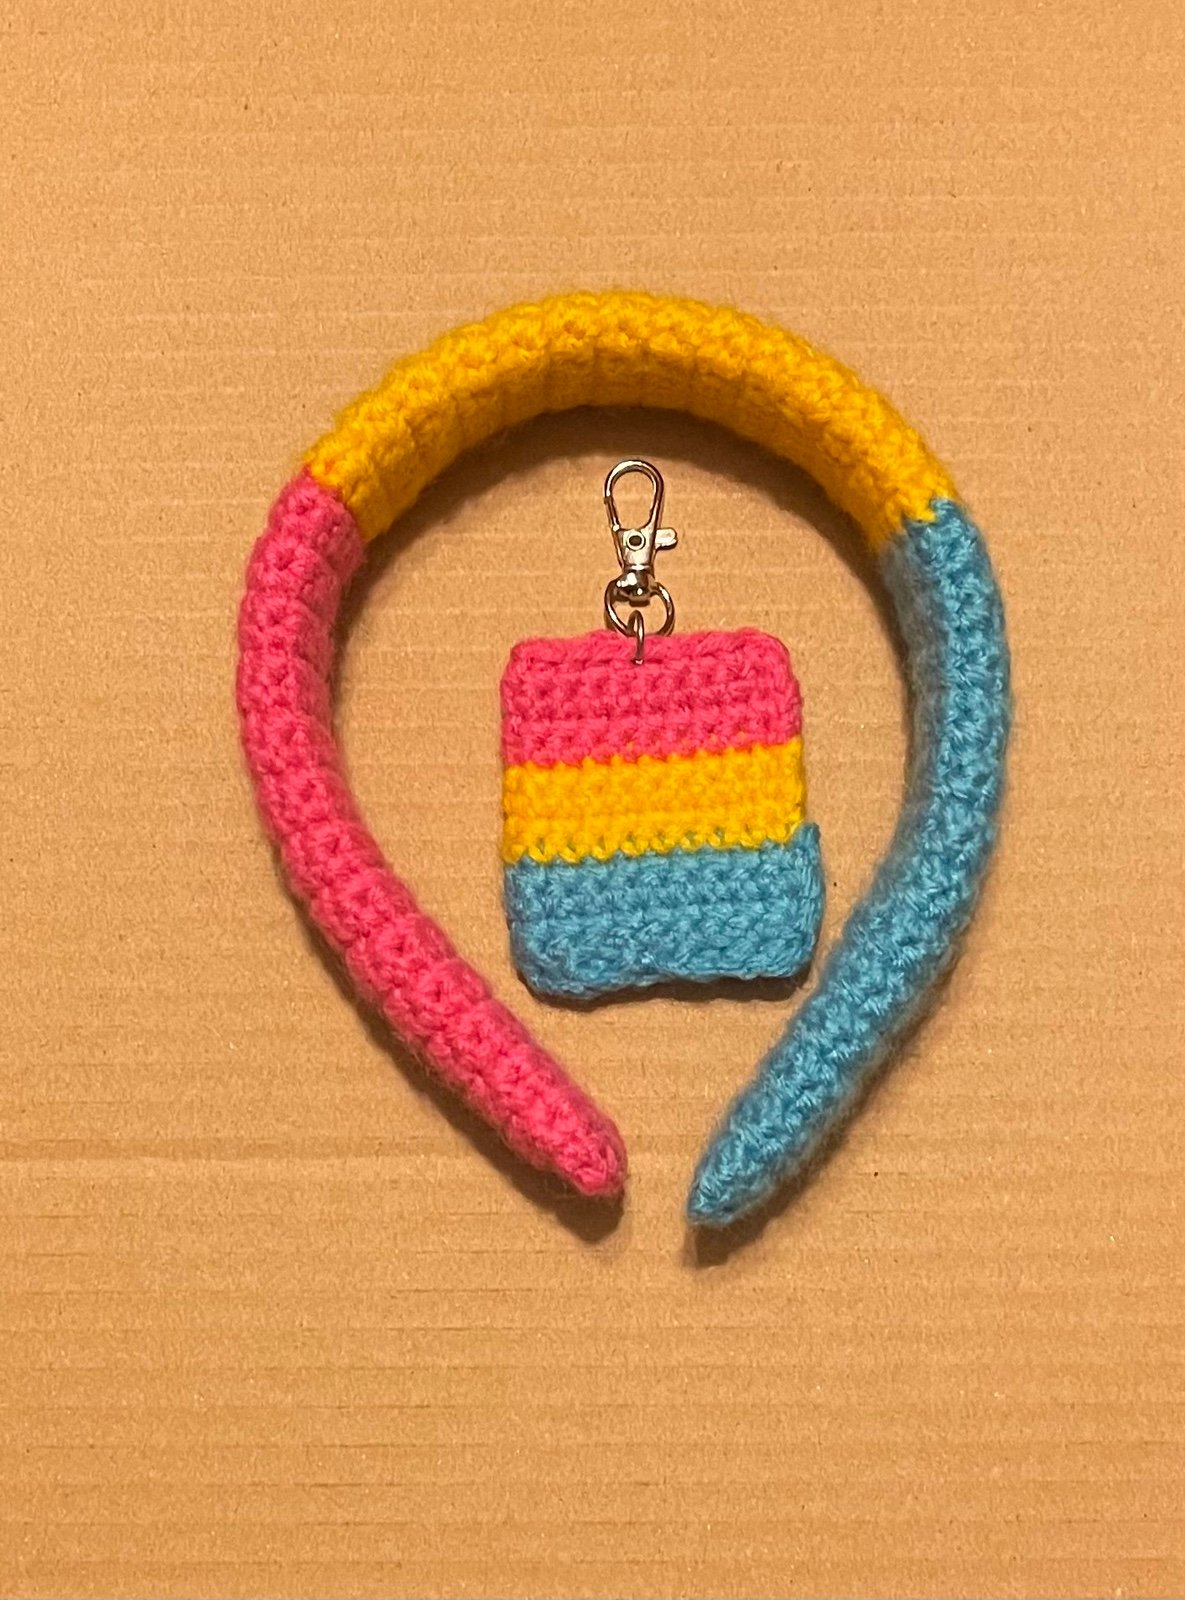 Pansexual Pride Headband and Keychain AhNKnzrDD